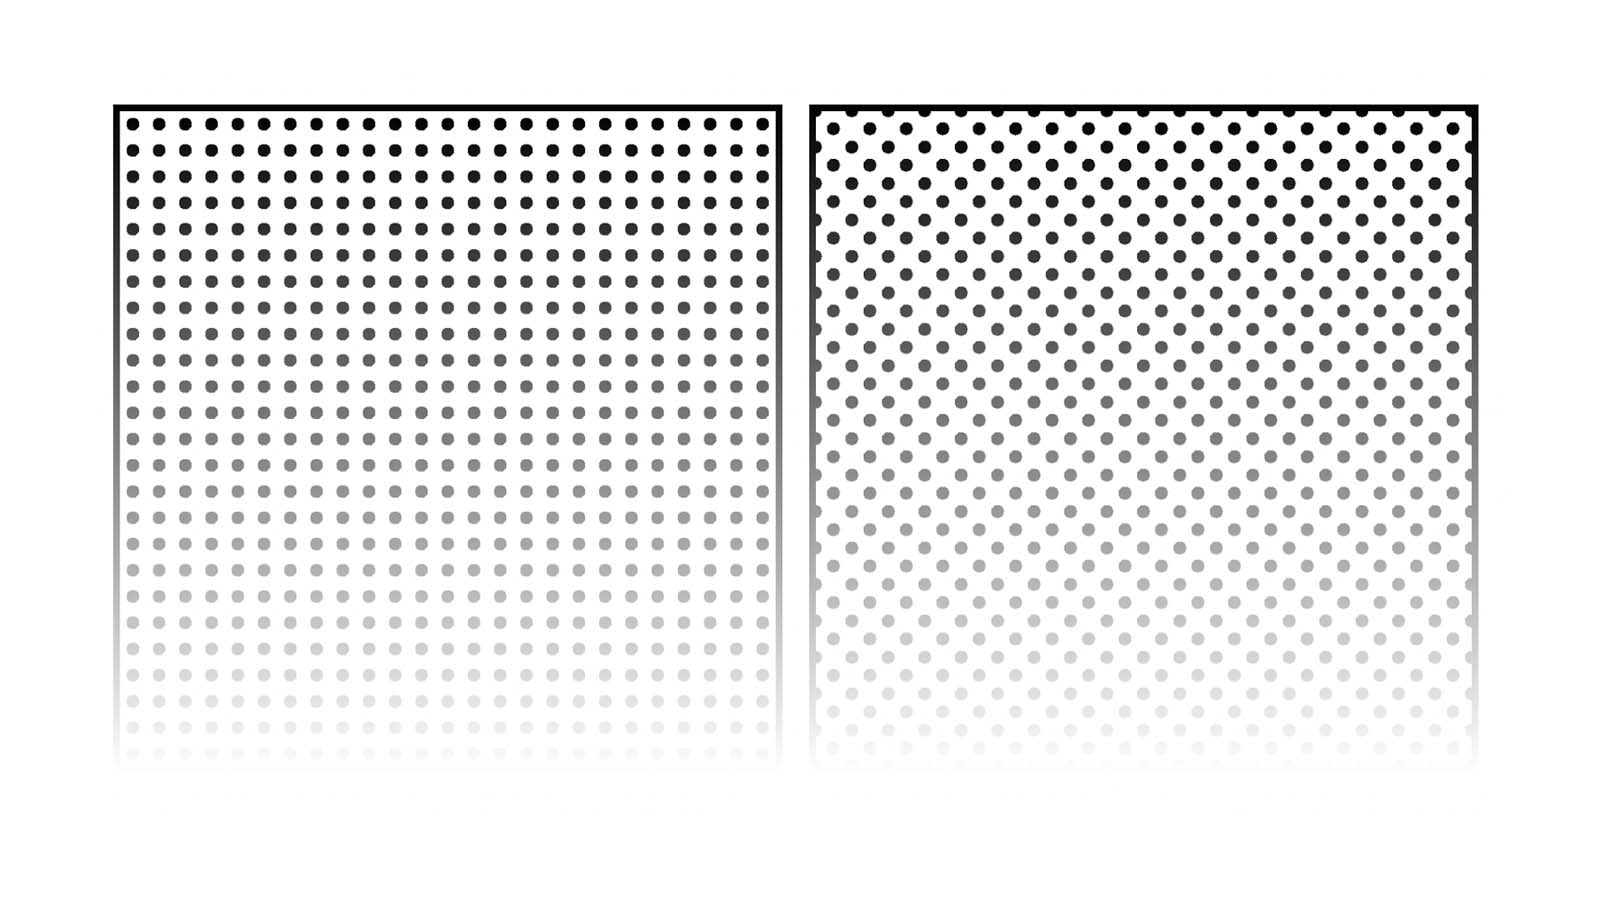 The two dotted patterns with mask applied, giving them the appearance of fading from top to bottom